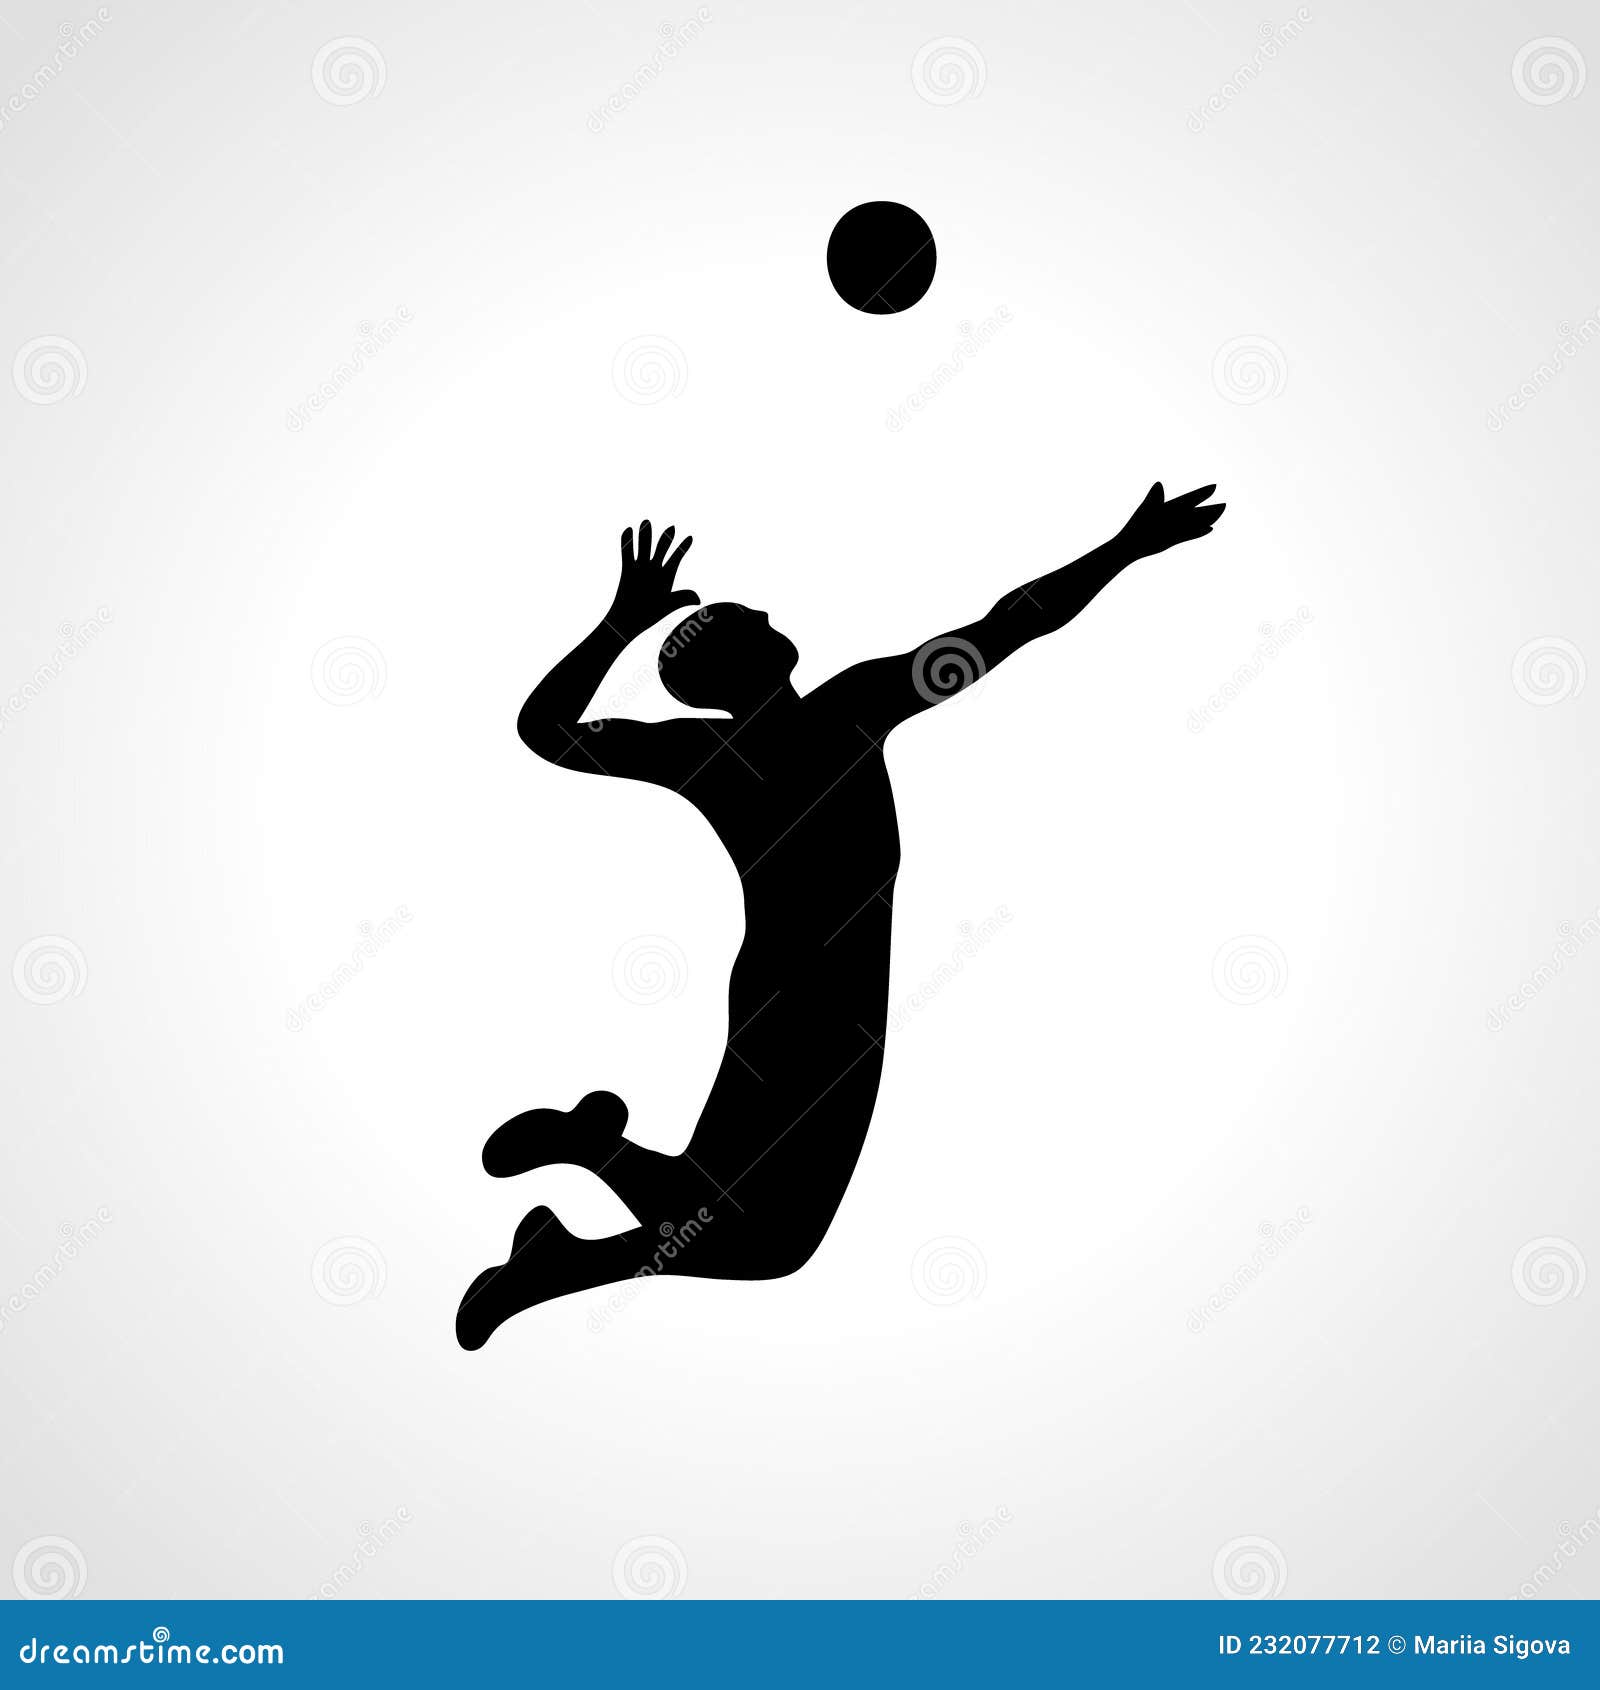 Volleyball Attacker Player Silhouette. Vooleyball Player Vector Stock ...